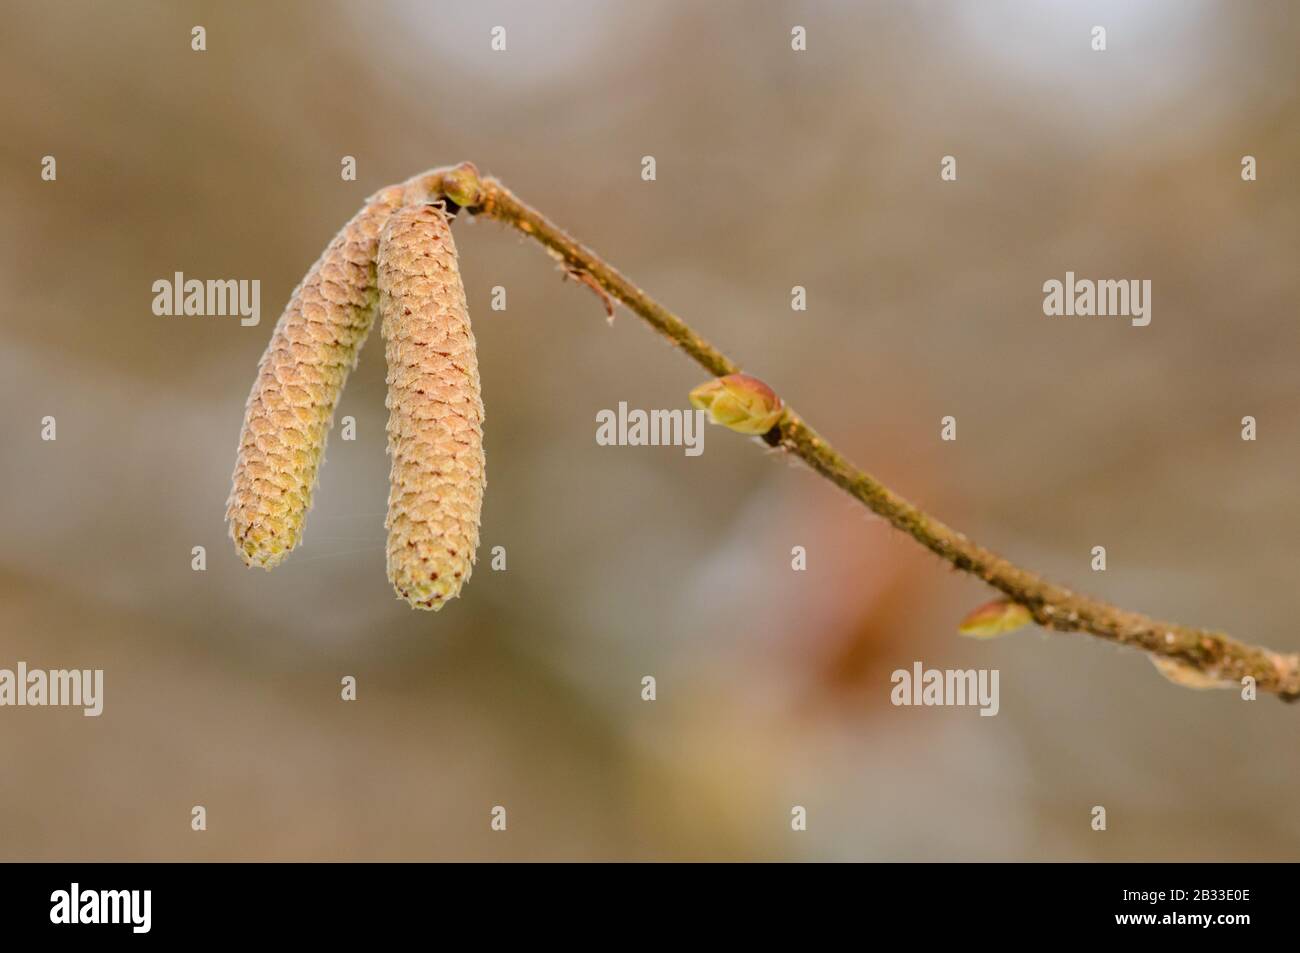 closed hazelnut tree catkins in winter on the end of twig, detail Stock Photo